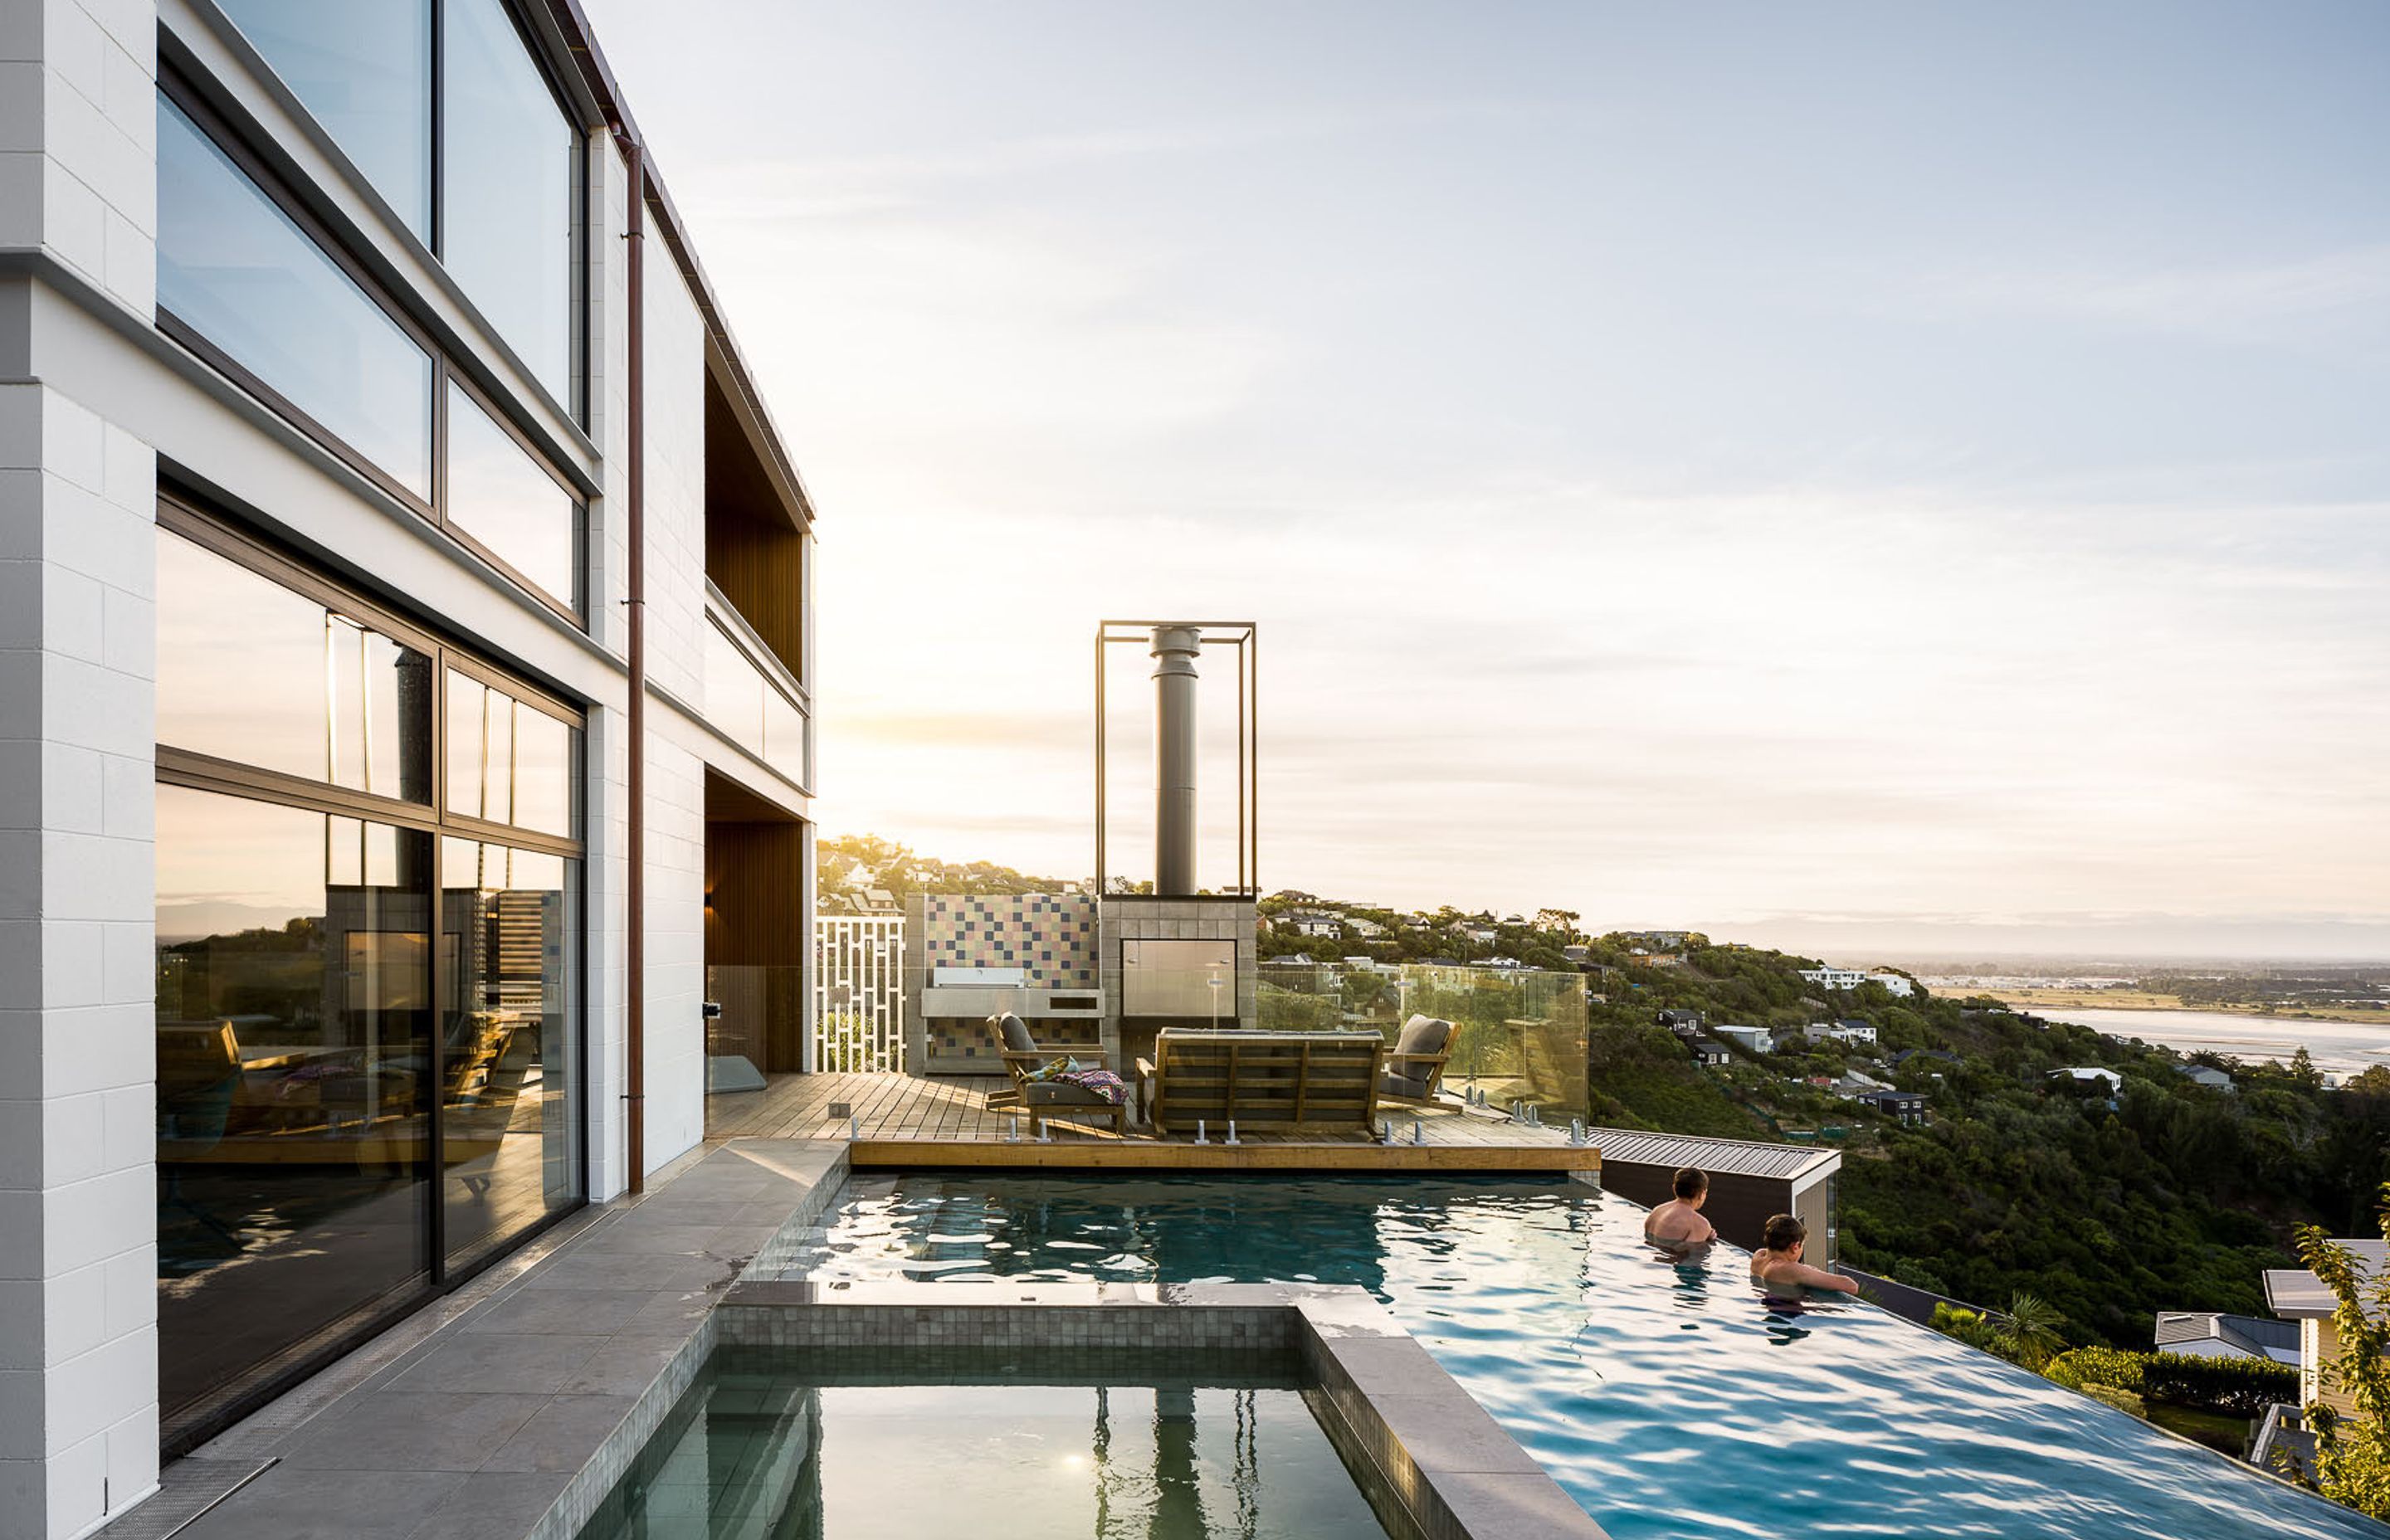 The architect says incorporating the swimming pool and entertaining terraces brought a whole new level of complexity to the design as they needed to be built up from the hill site.